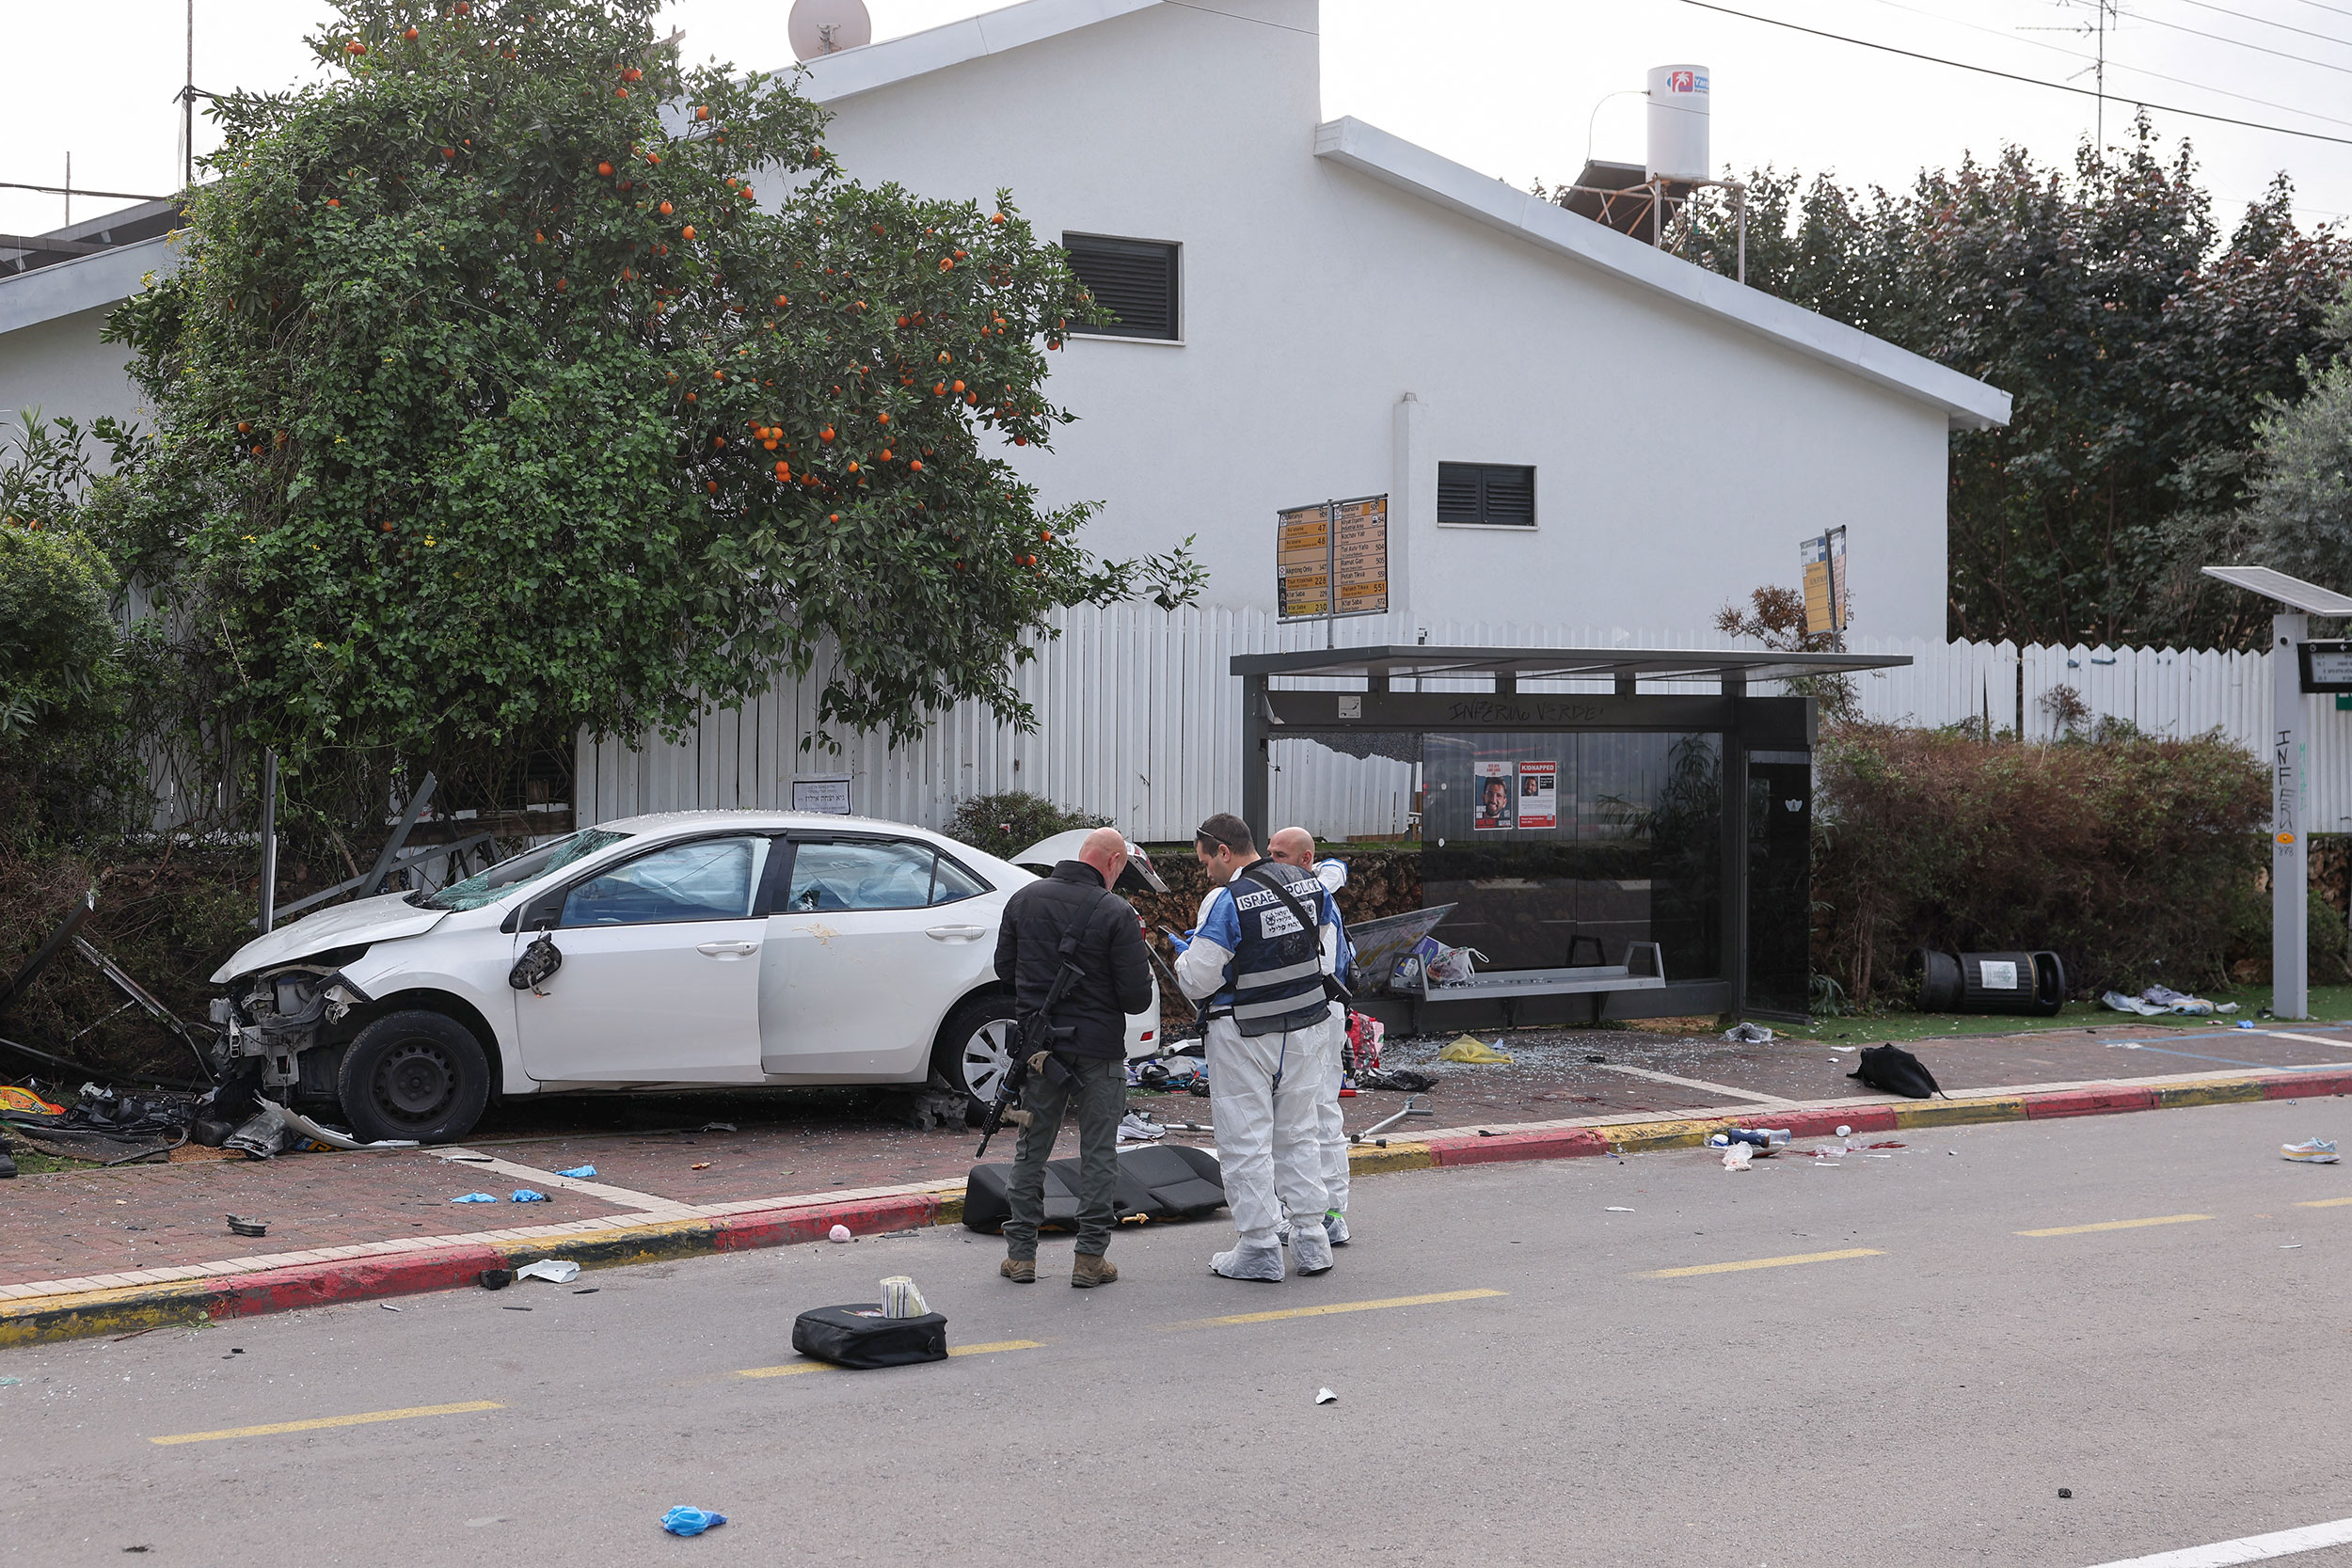 Israel police forensics personnel inspect a damaged car following the attack in Raanana on January 15.